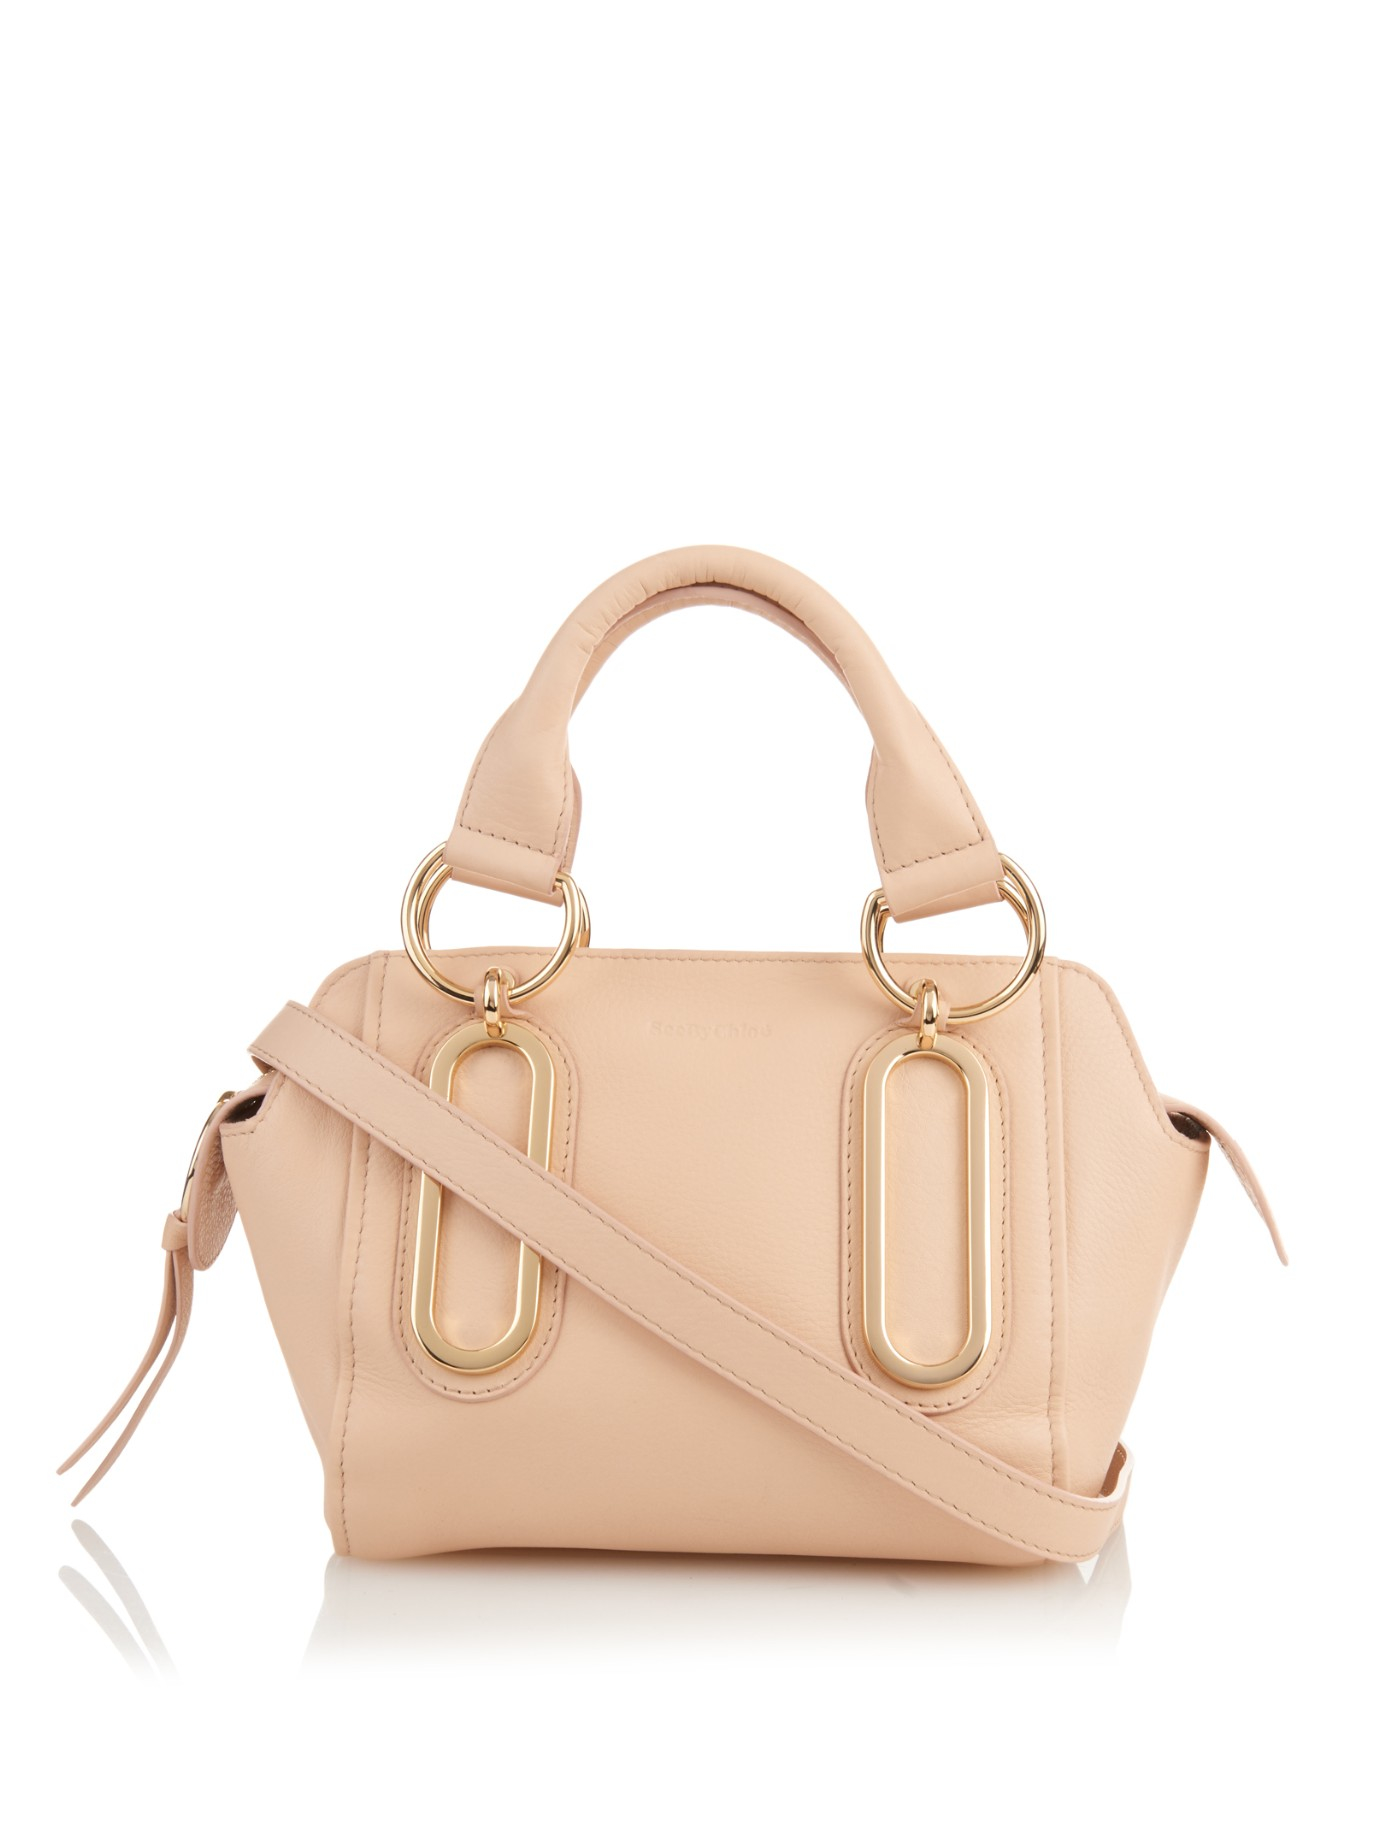 chloe messenger bag marcie - See by chlo�� Paige Mini Leather Bag in Pink (NUDE) | Lyst